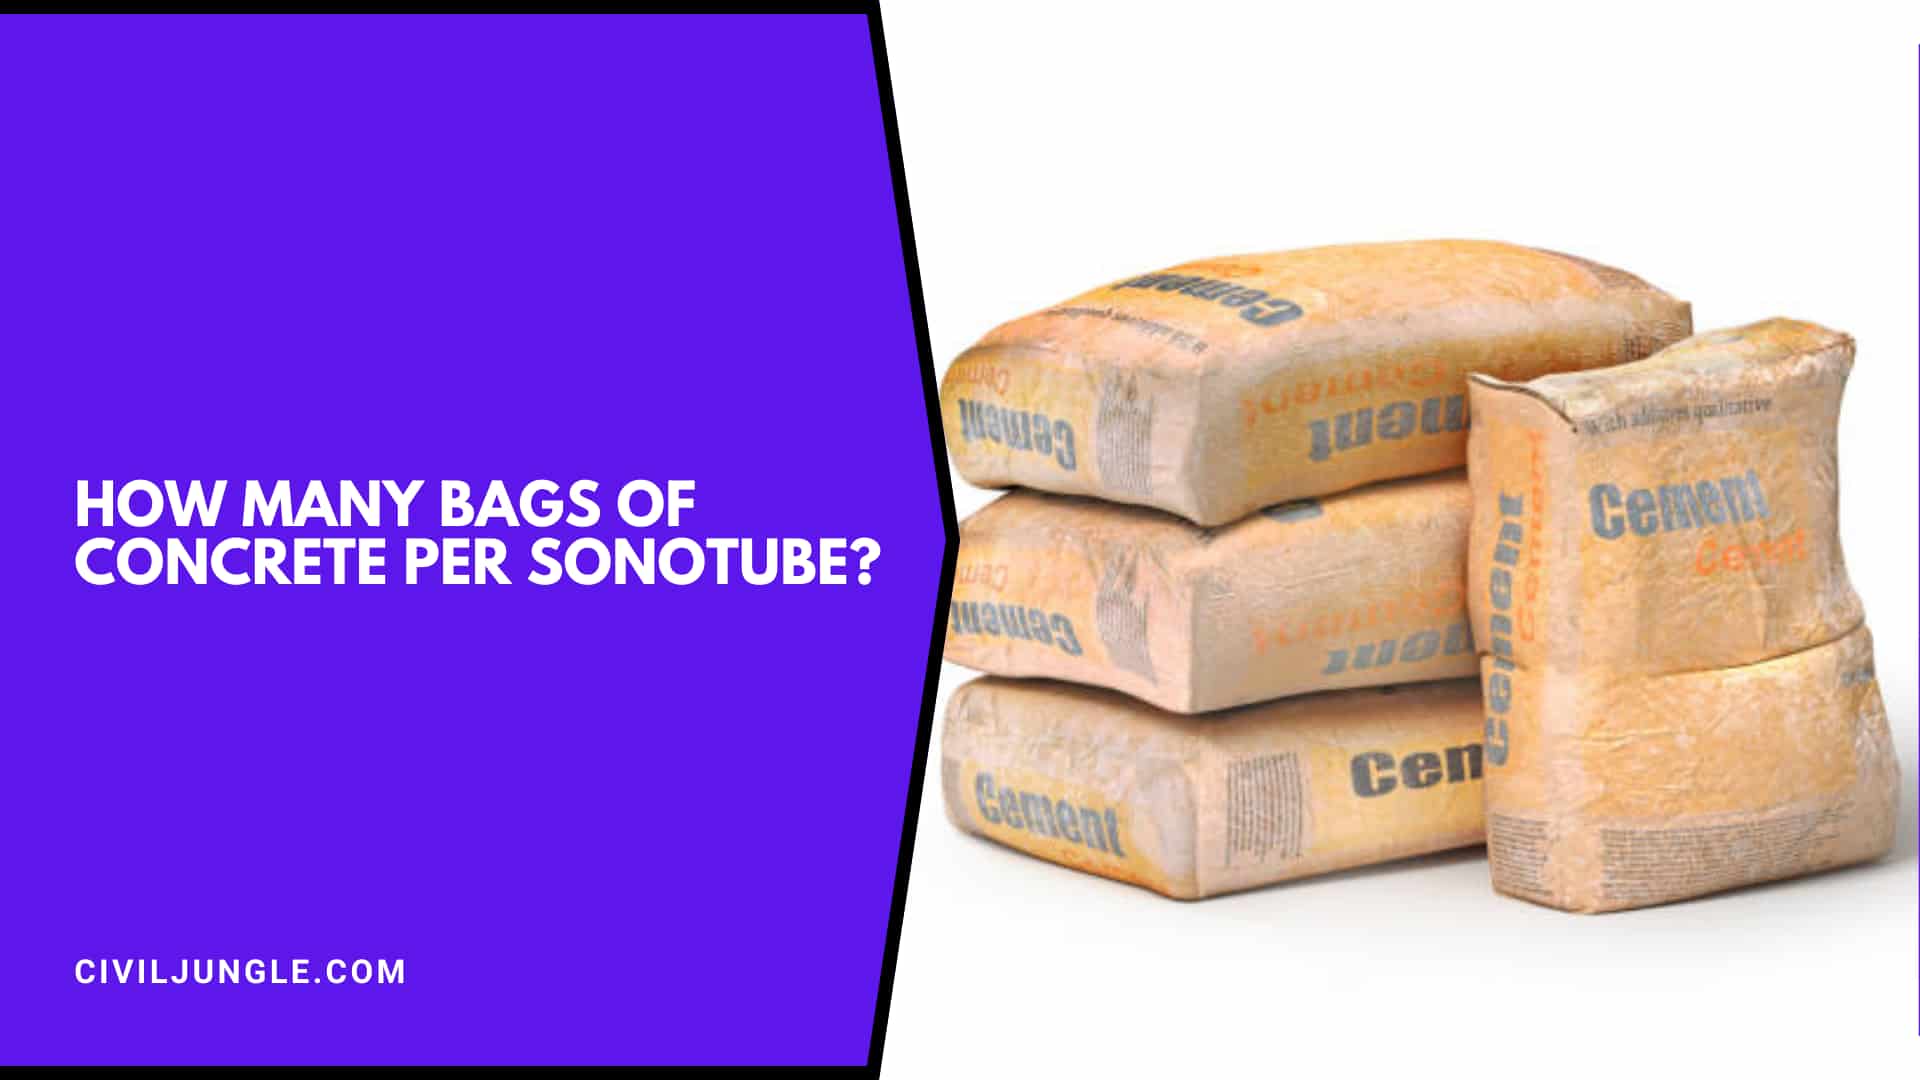 How Many Bags Of Concrete Per Sonotube?